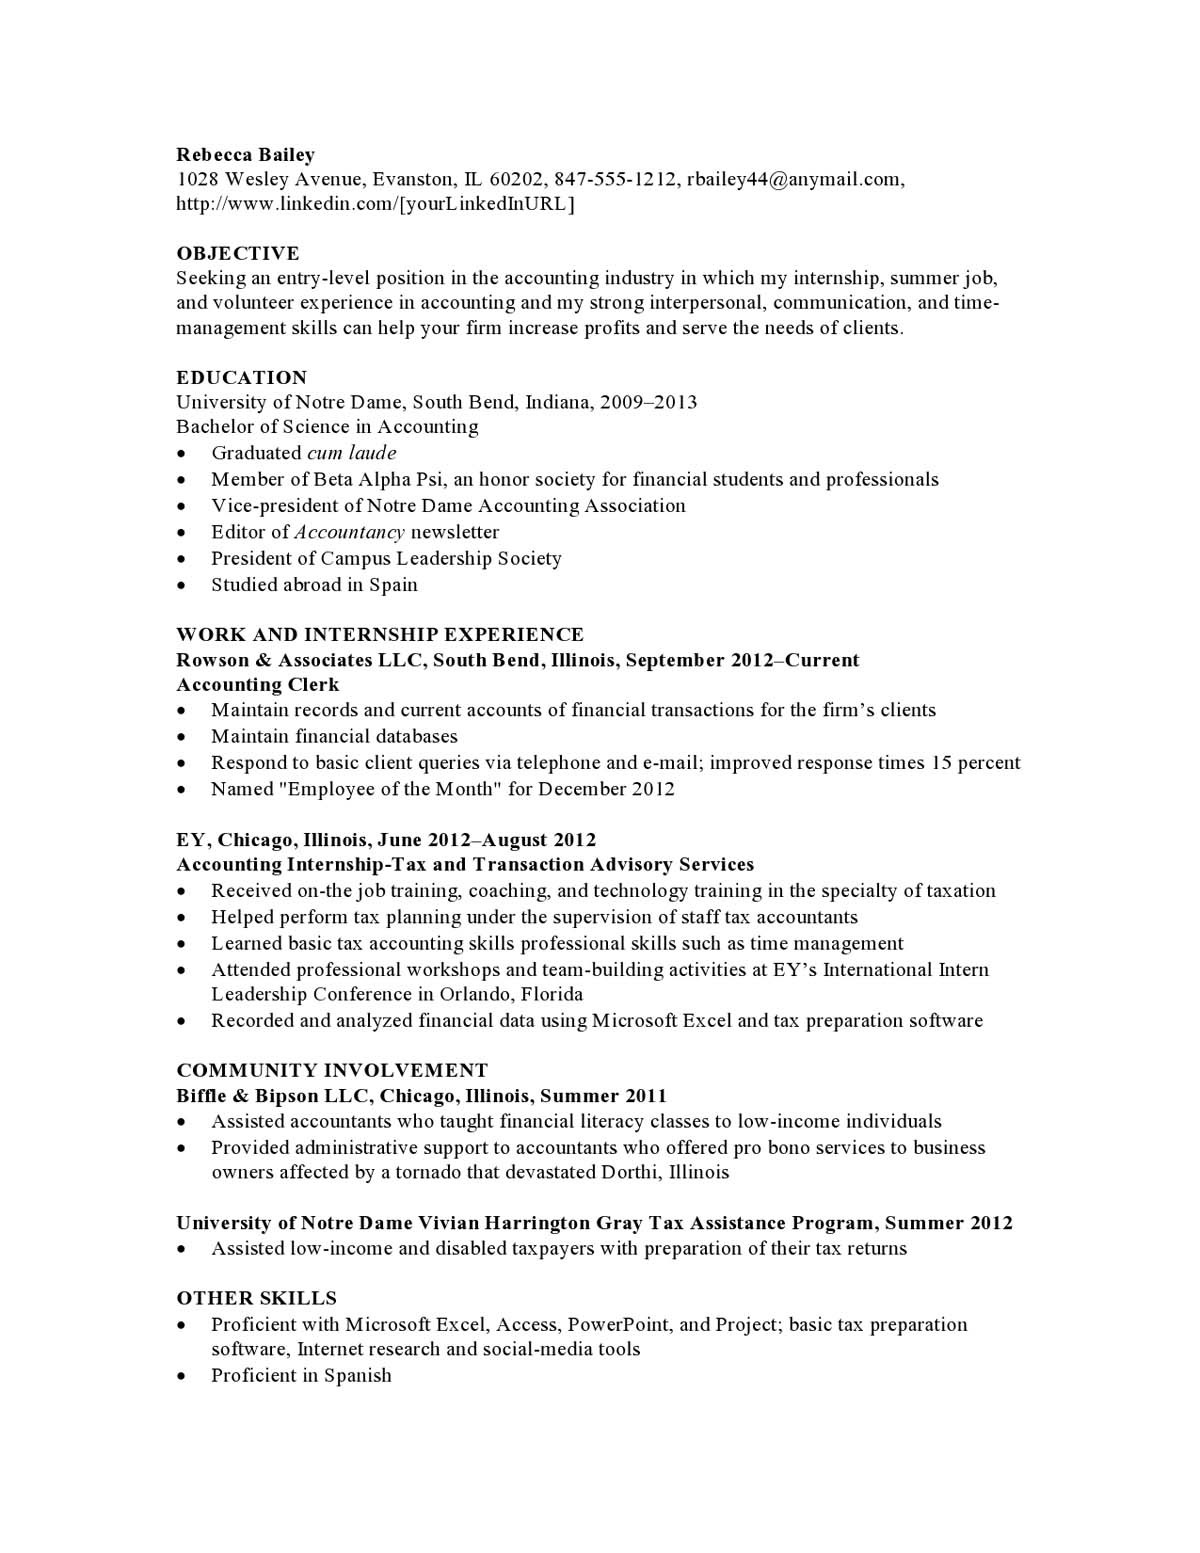 Sample Resume for Internship In Law Firm Resume Samples Templates Examples Vault.com